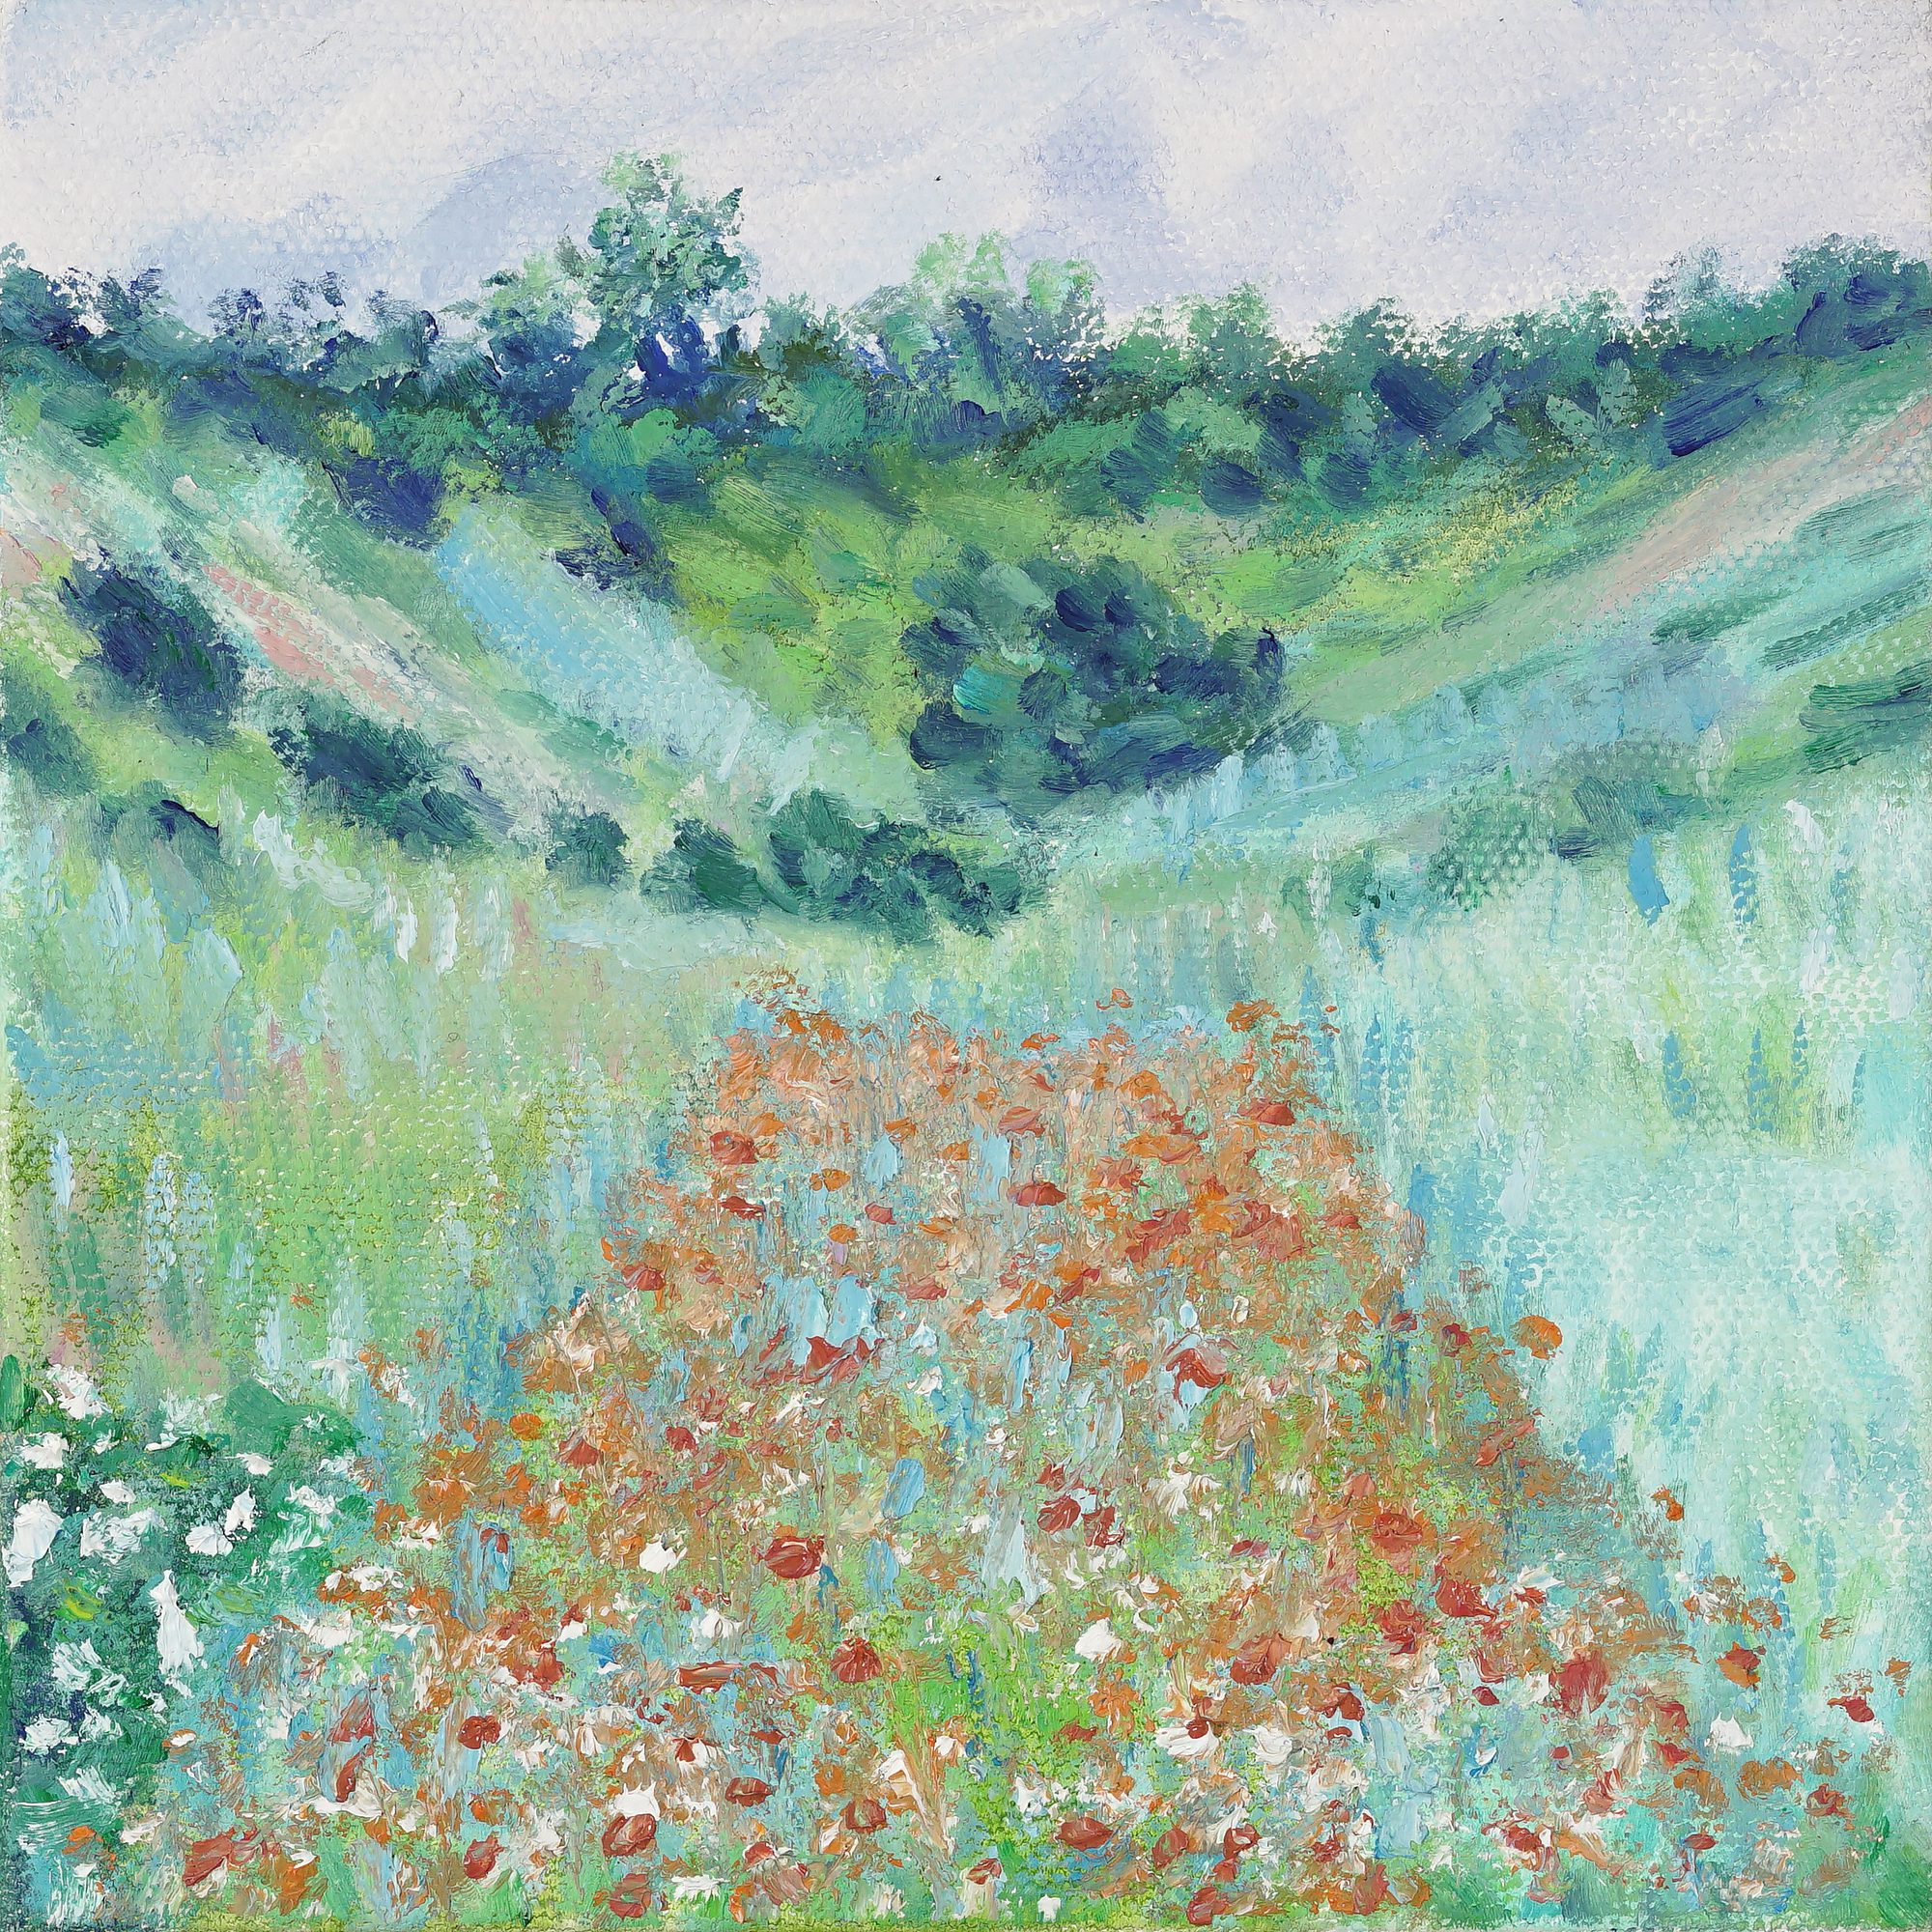 Cindy Sugg, Poppy Field in a Hollow, after Monet